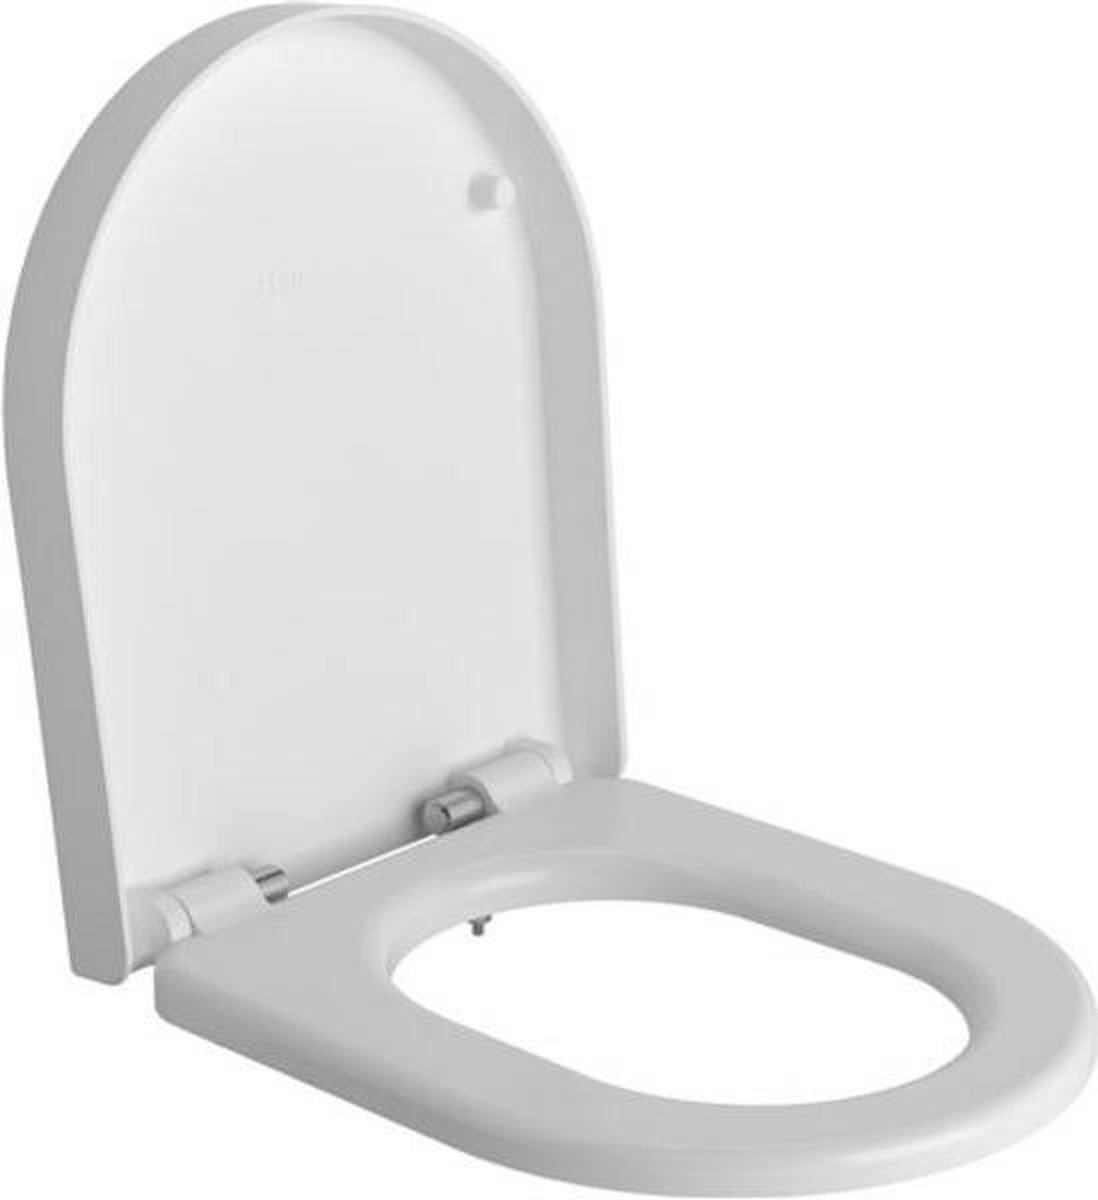 Clou First toiletzitting met deksel soft closing en quick release systeem B36xH4.8xD42cm CL/04.06030 - Wit